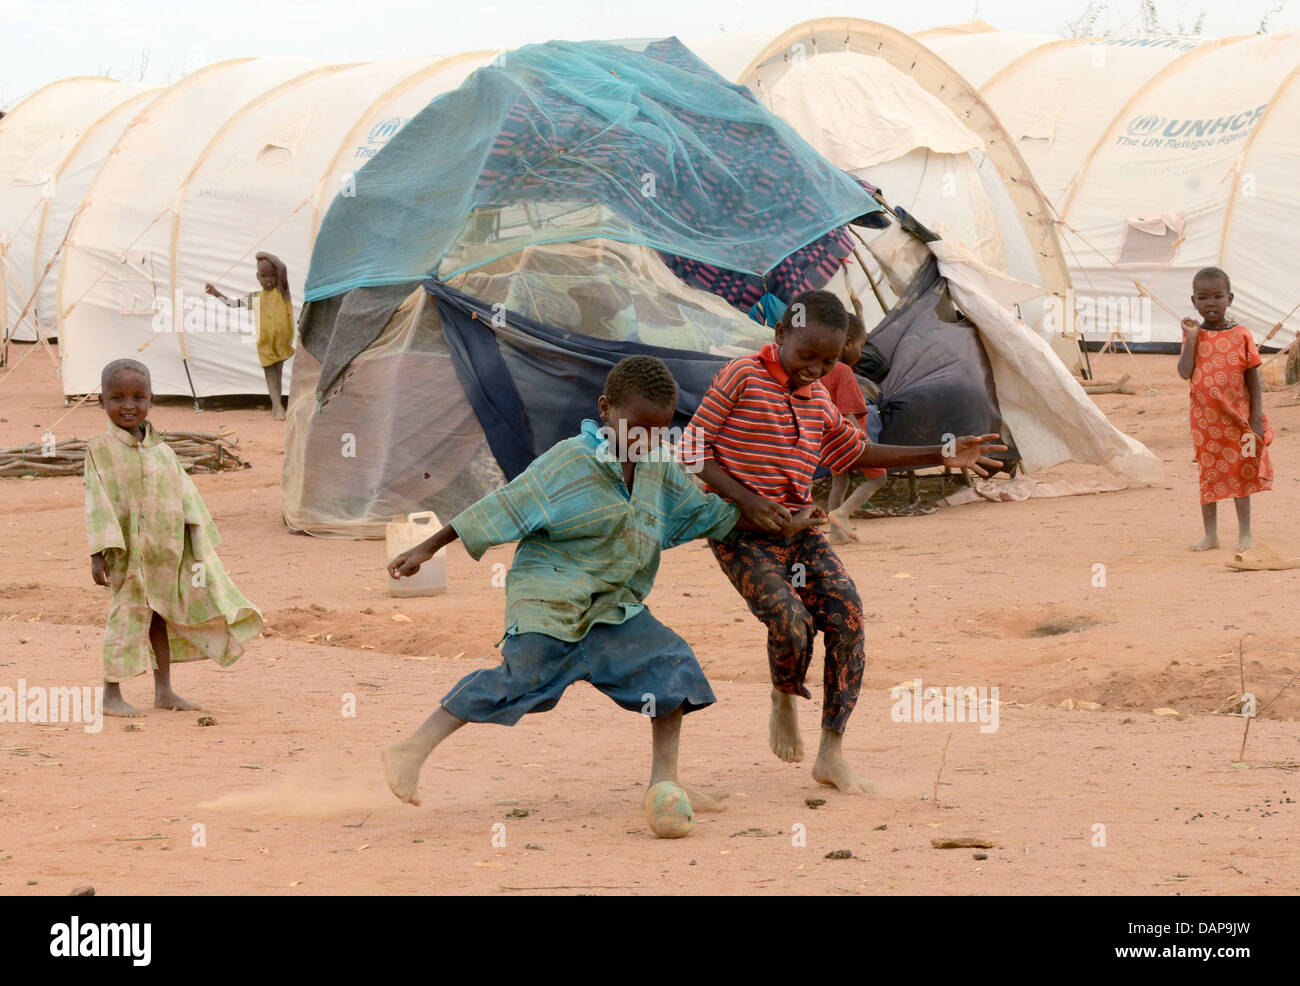 Boys play soccer at a refugee camp in Dadaab, Kenya 4 August 2011. Somalia and parts of Kenya have been struck by one of the worst draughts and famines in six decades, more than 350 000 refugees have found shelter in the worlds biggest refugee camp. Photo: Boris Roessler Stock Photo